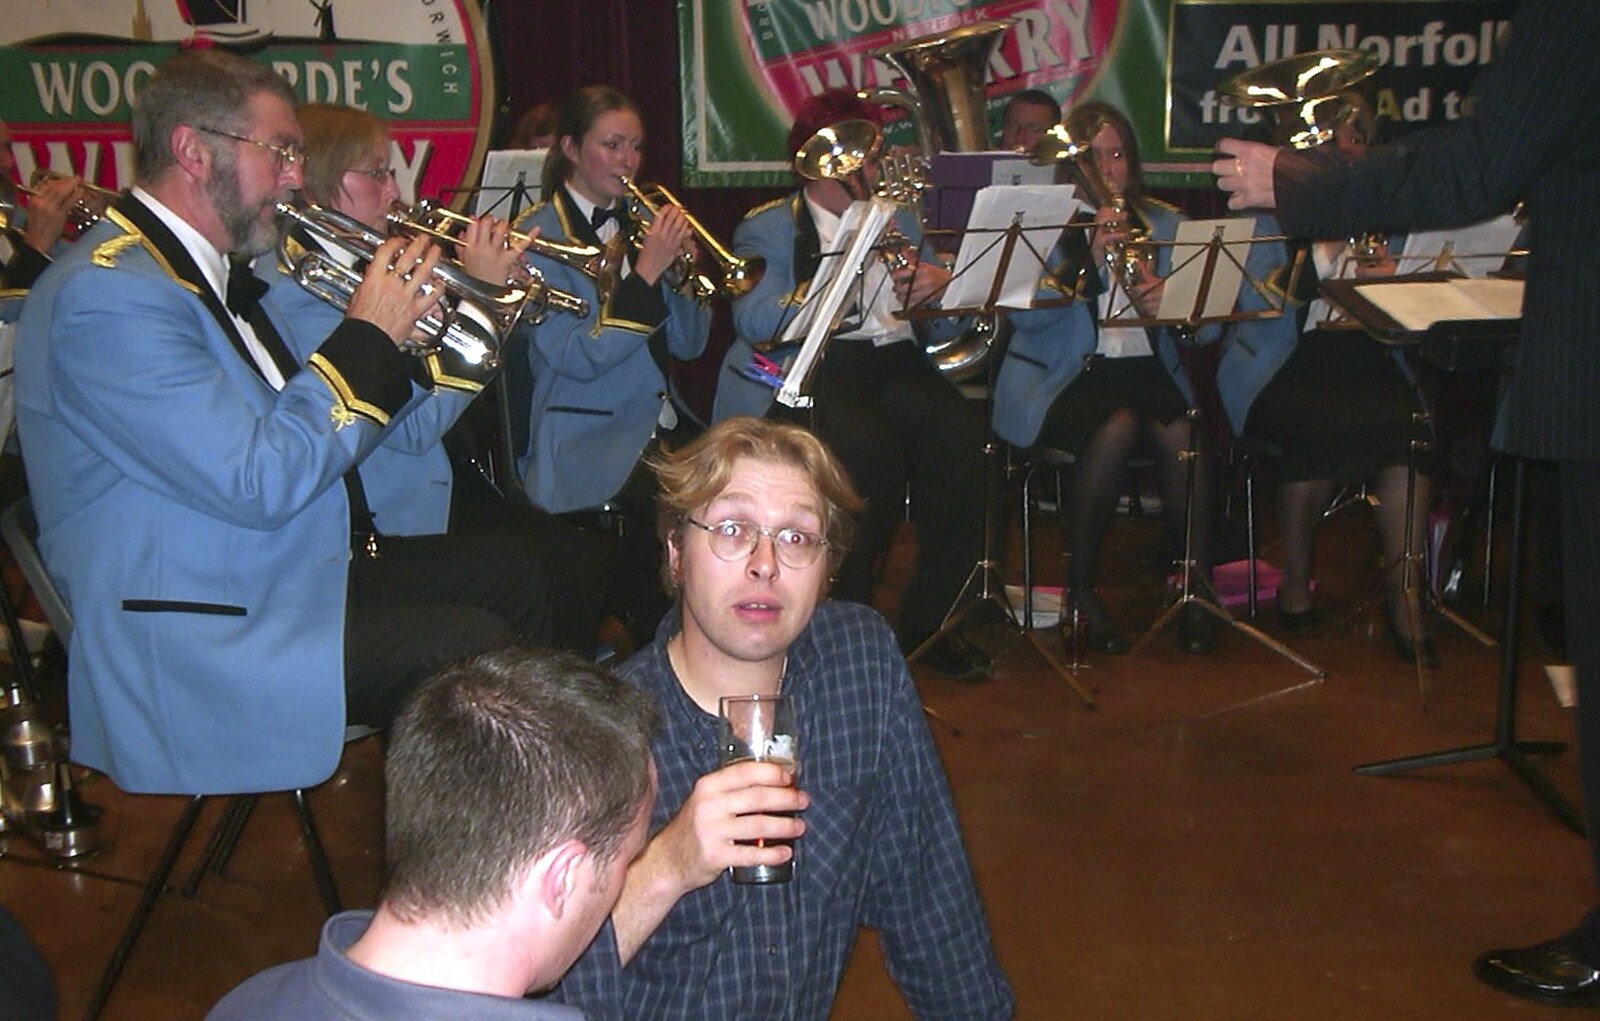 Marc looks a bit surprised from The Brome Swan at the Norwich Beer Festival, St. Andrew's Hall, Norwich - 29th October 2003